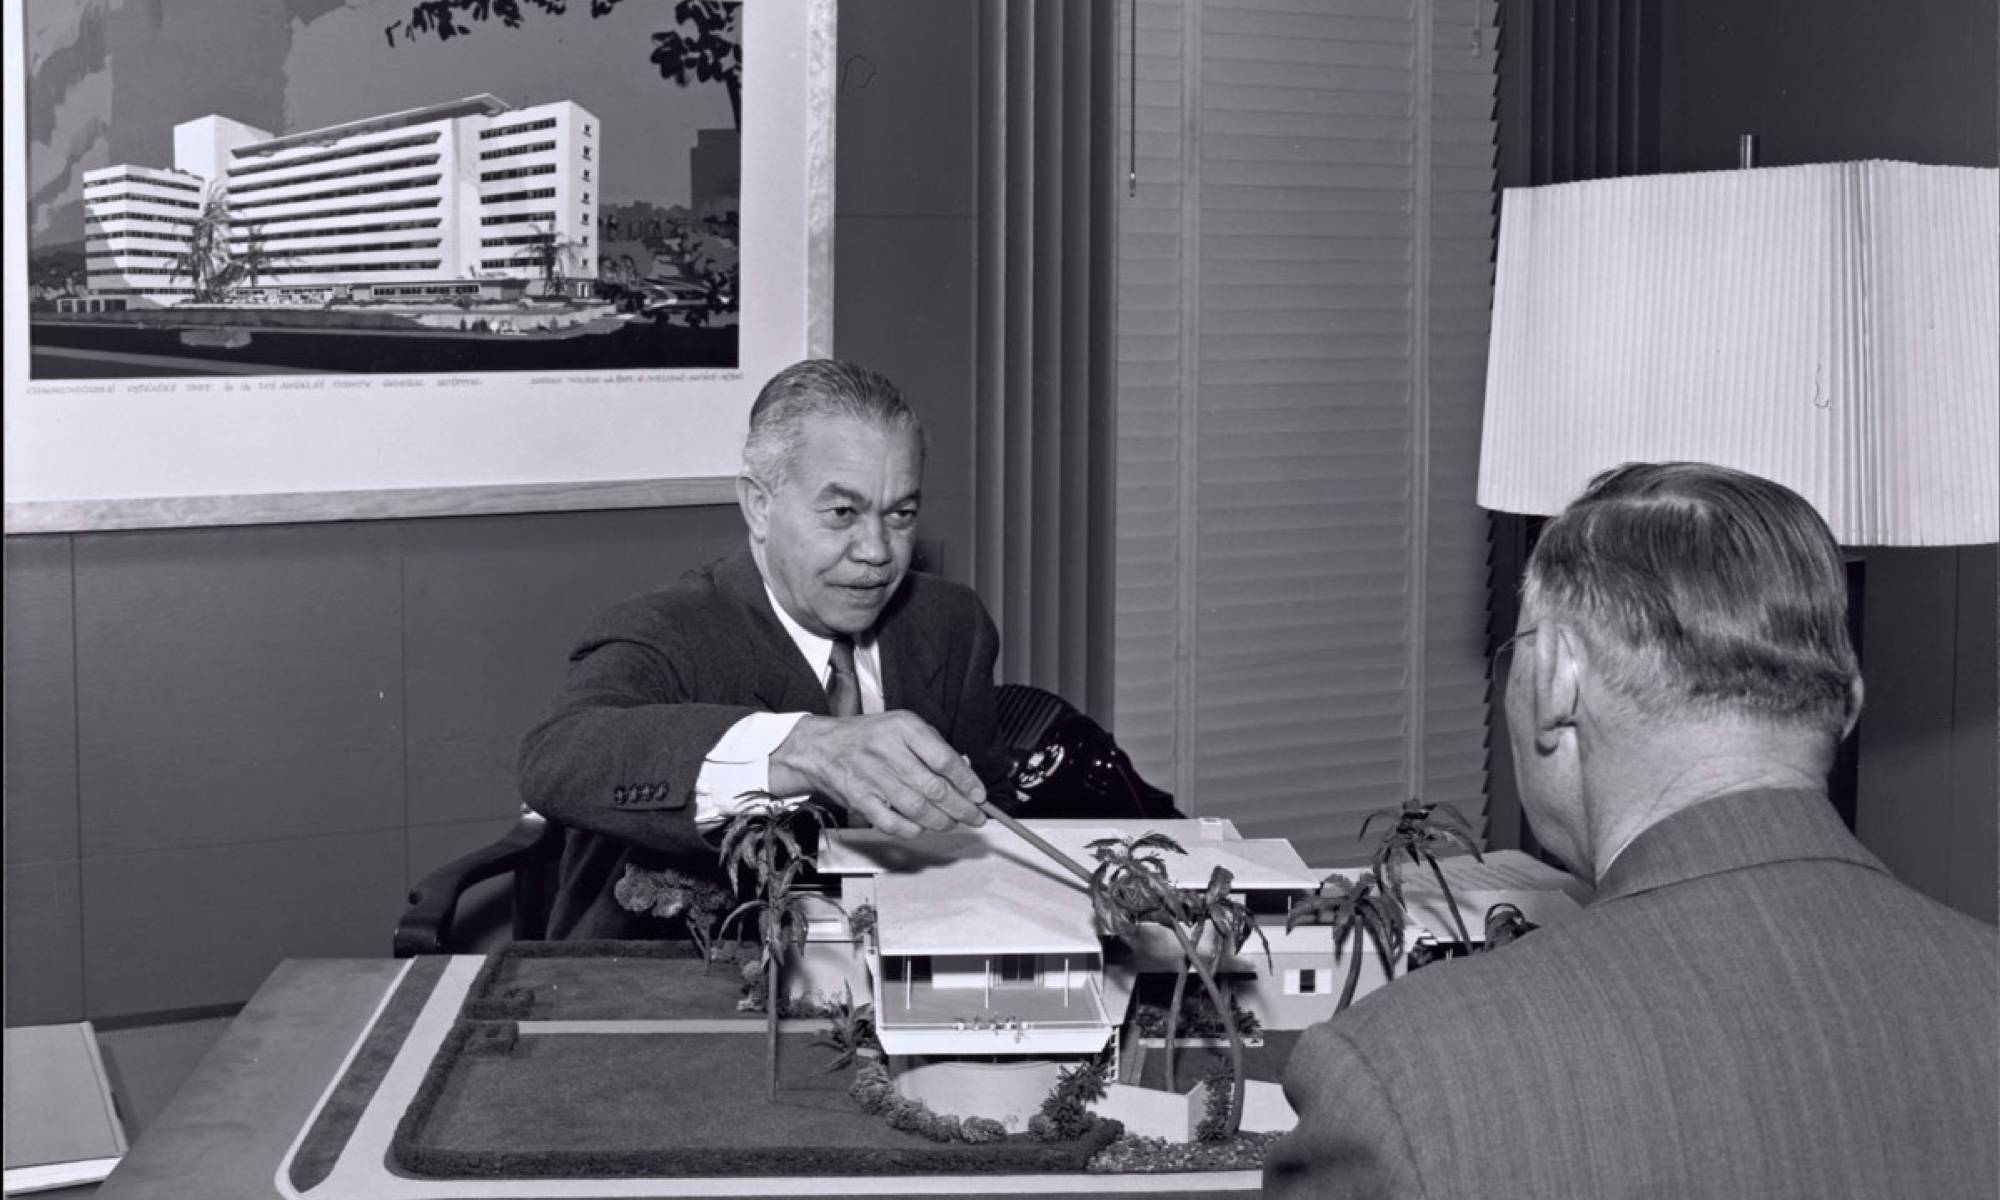 Paul Revere Williams in his office with a model of a mid century modern home